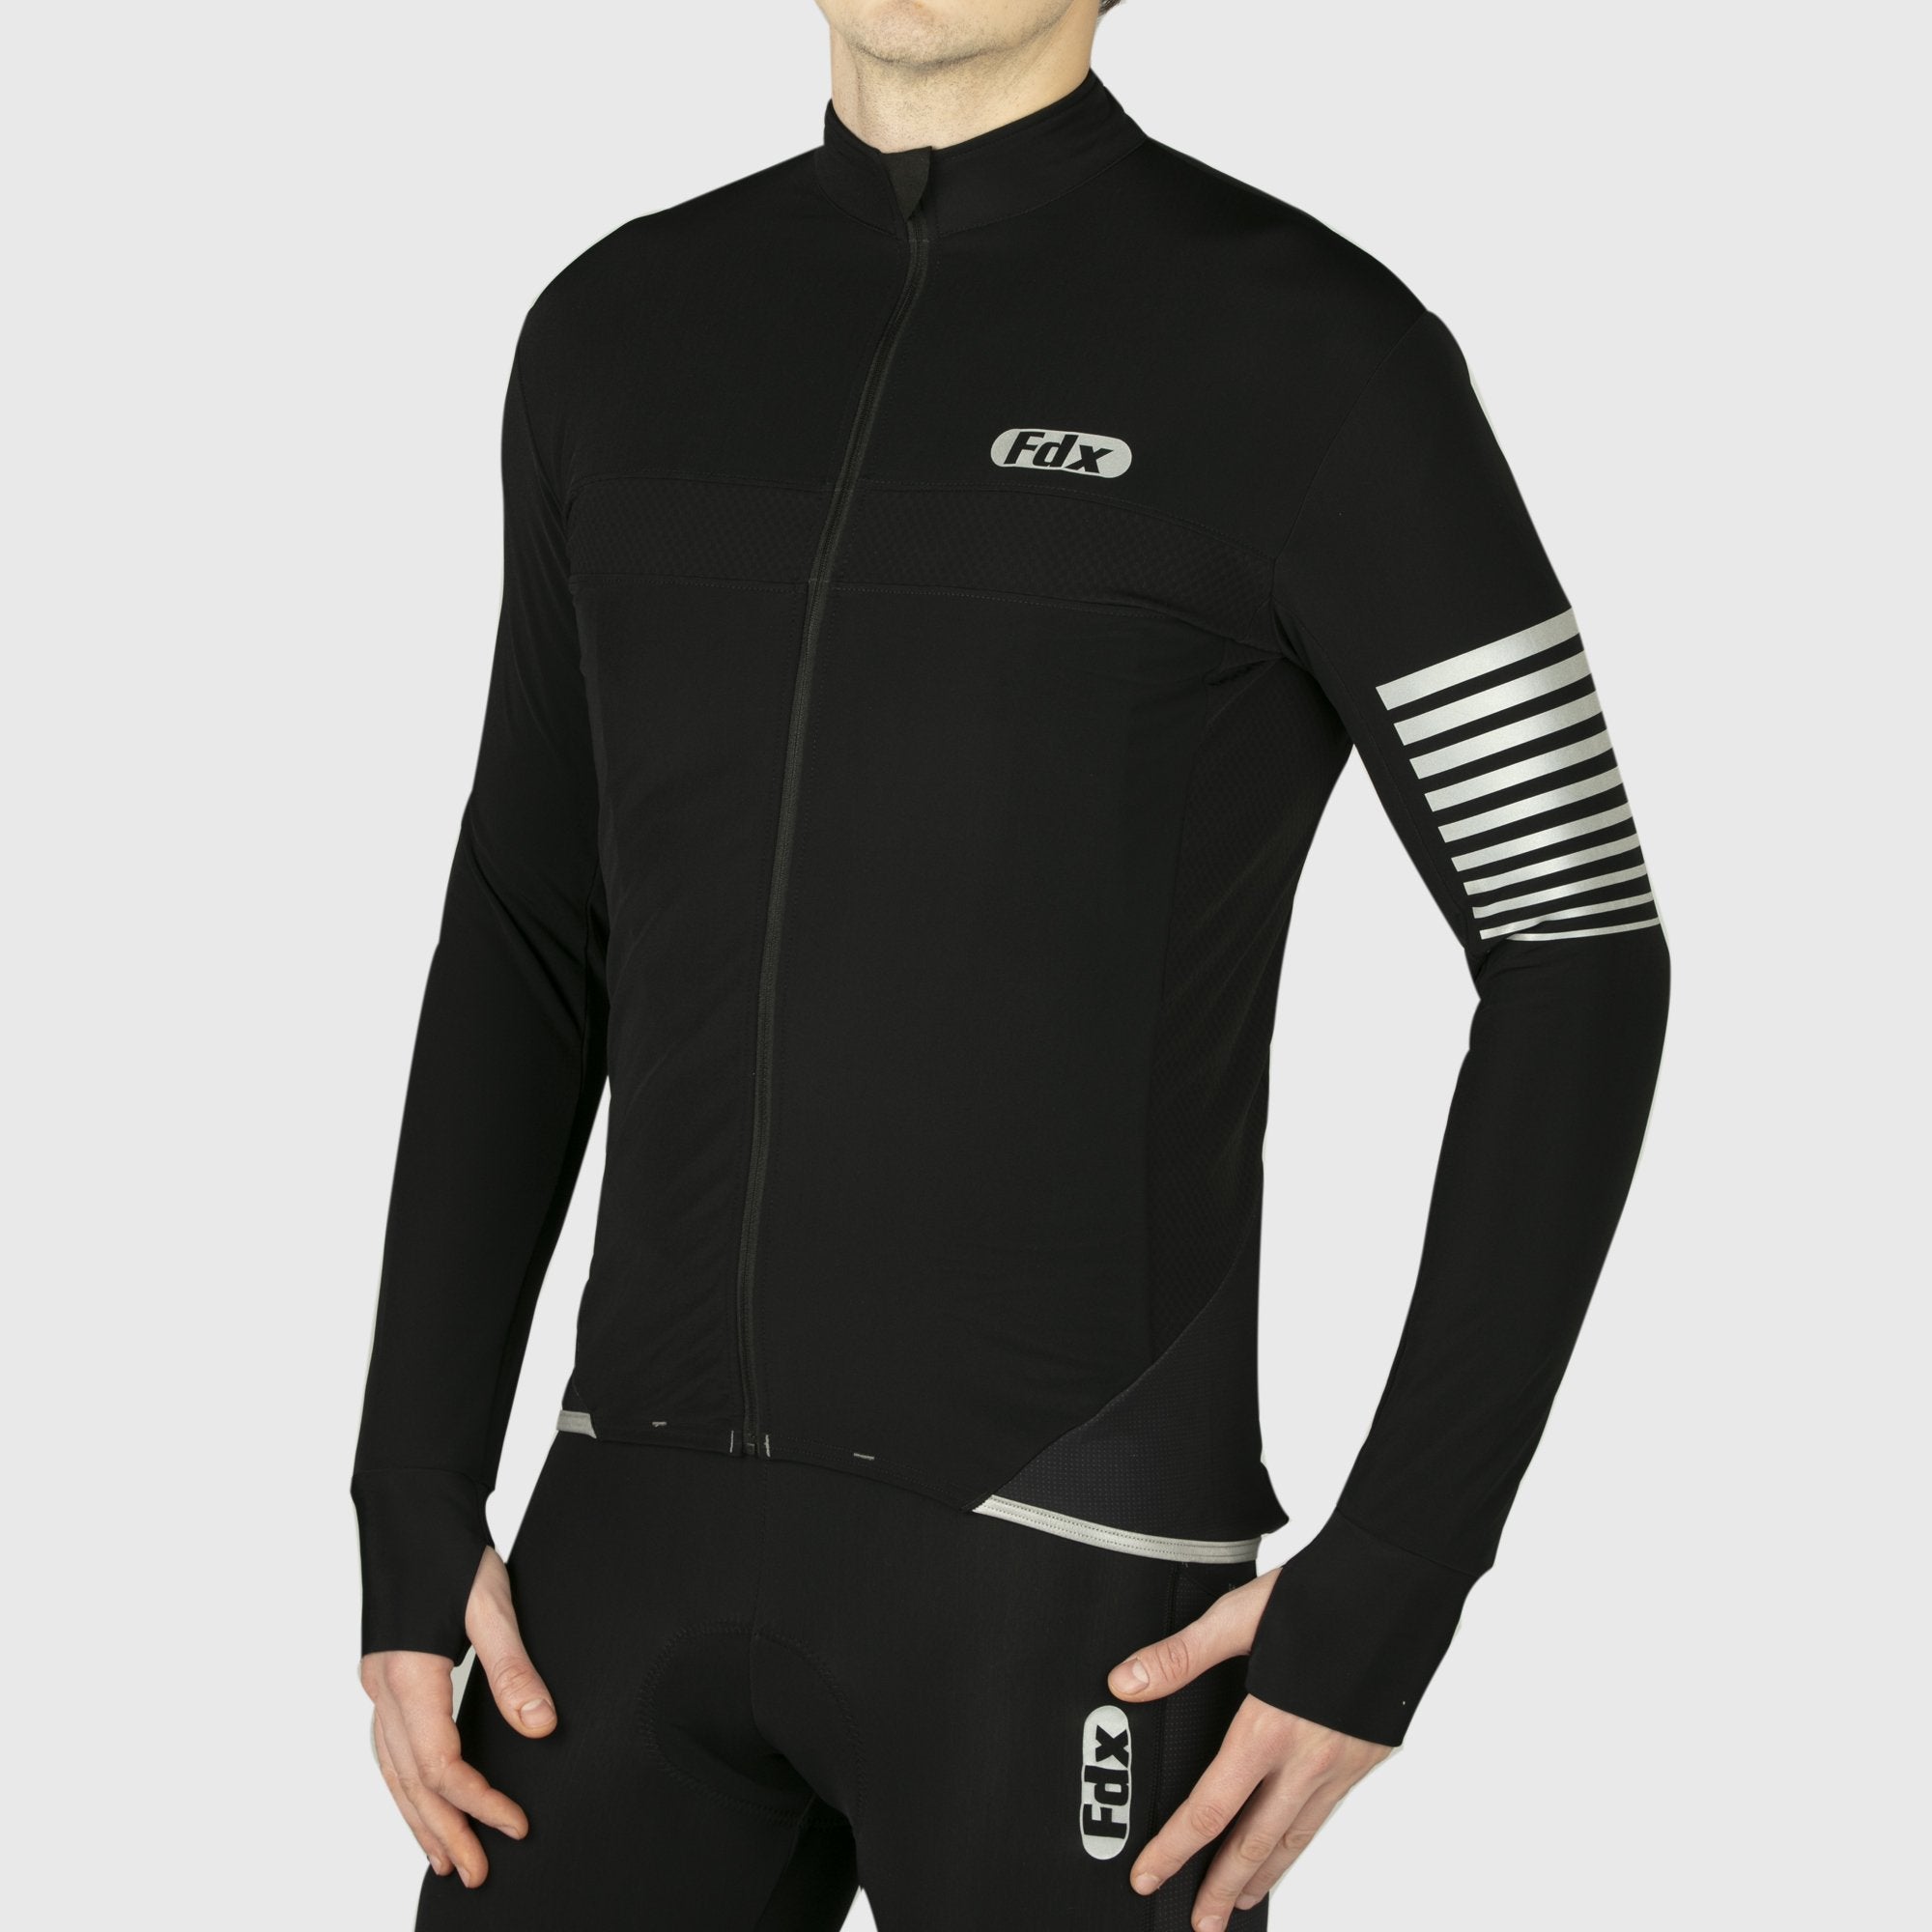 Fdx All Day Men's Black Thermal Roubaix Long Sleeve Cycling Jersey